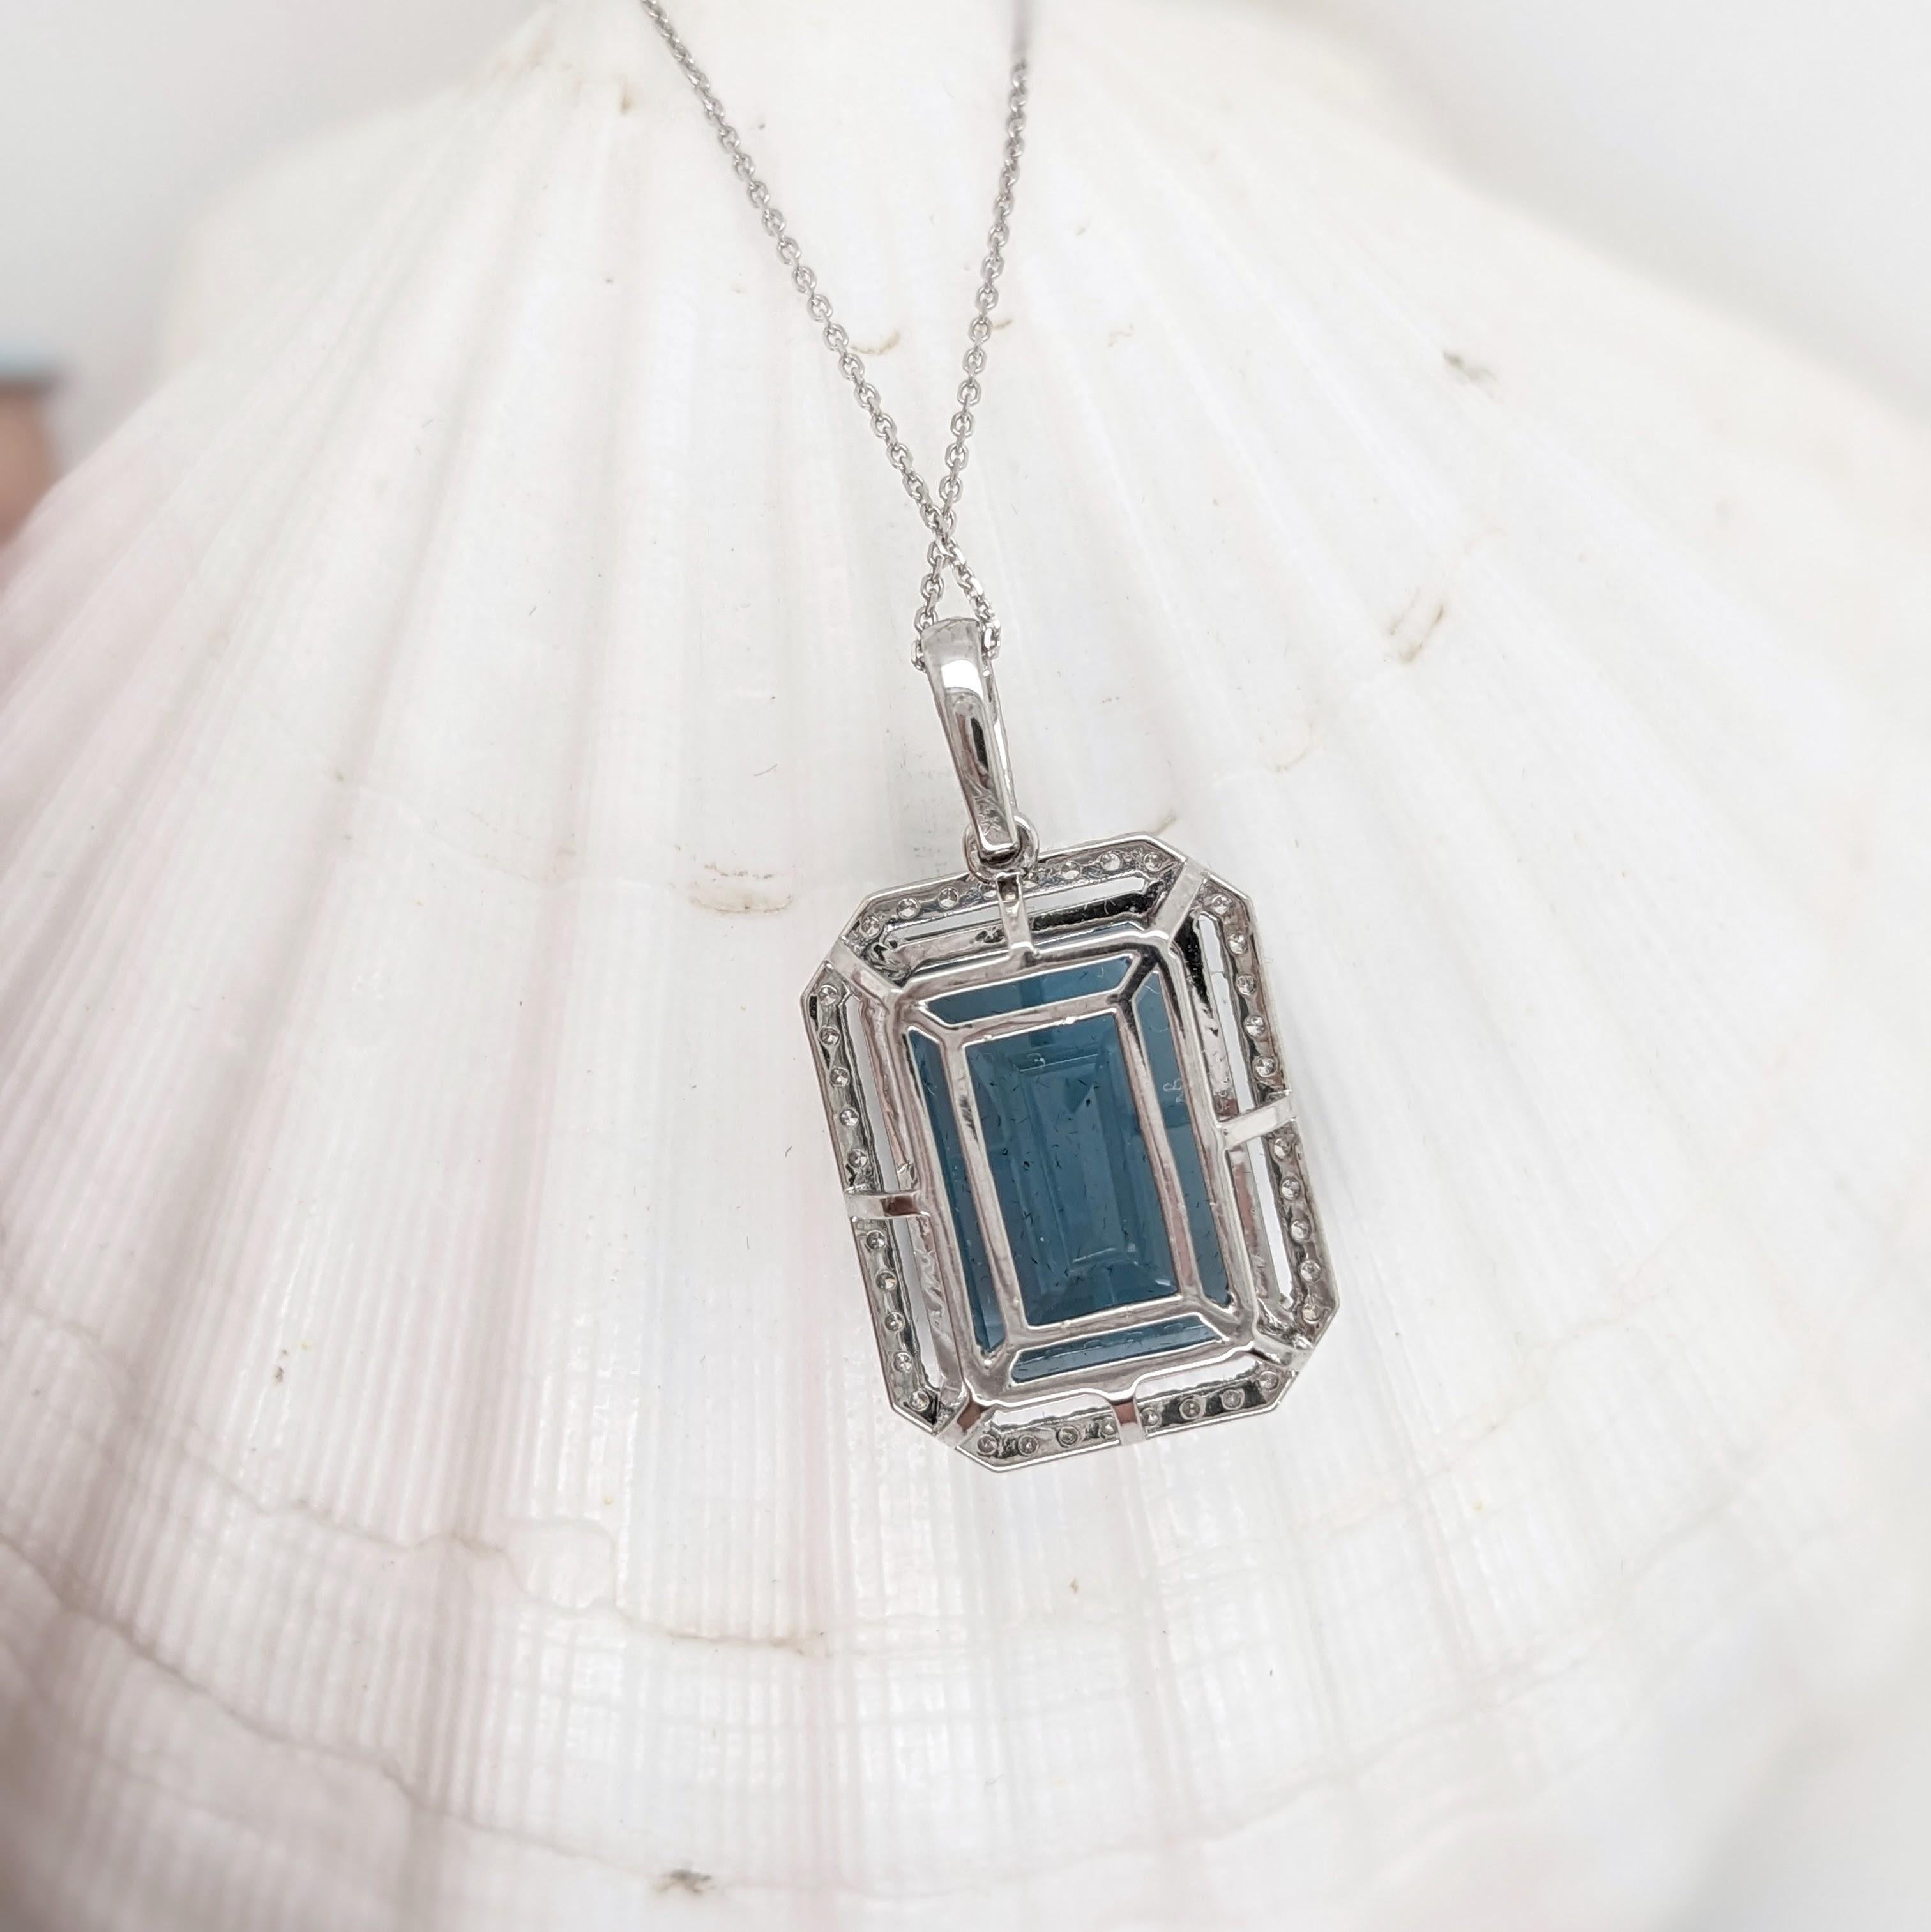 21ct London Topaz Pendant w Earth Mined Diamonds in Solid 14K Gold EM 18x13mm In New Condition For Sale In Columbus, OH